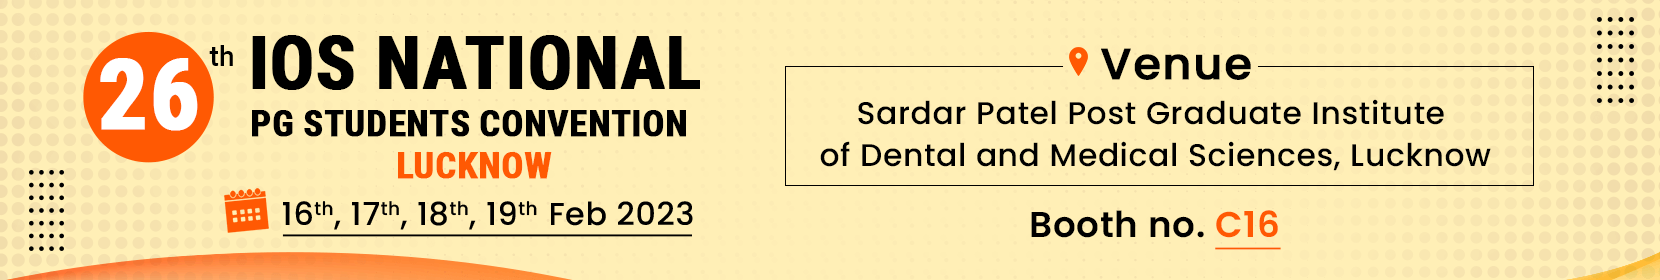 Dental Products